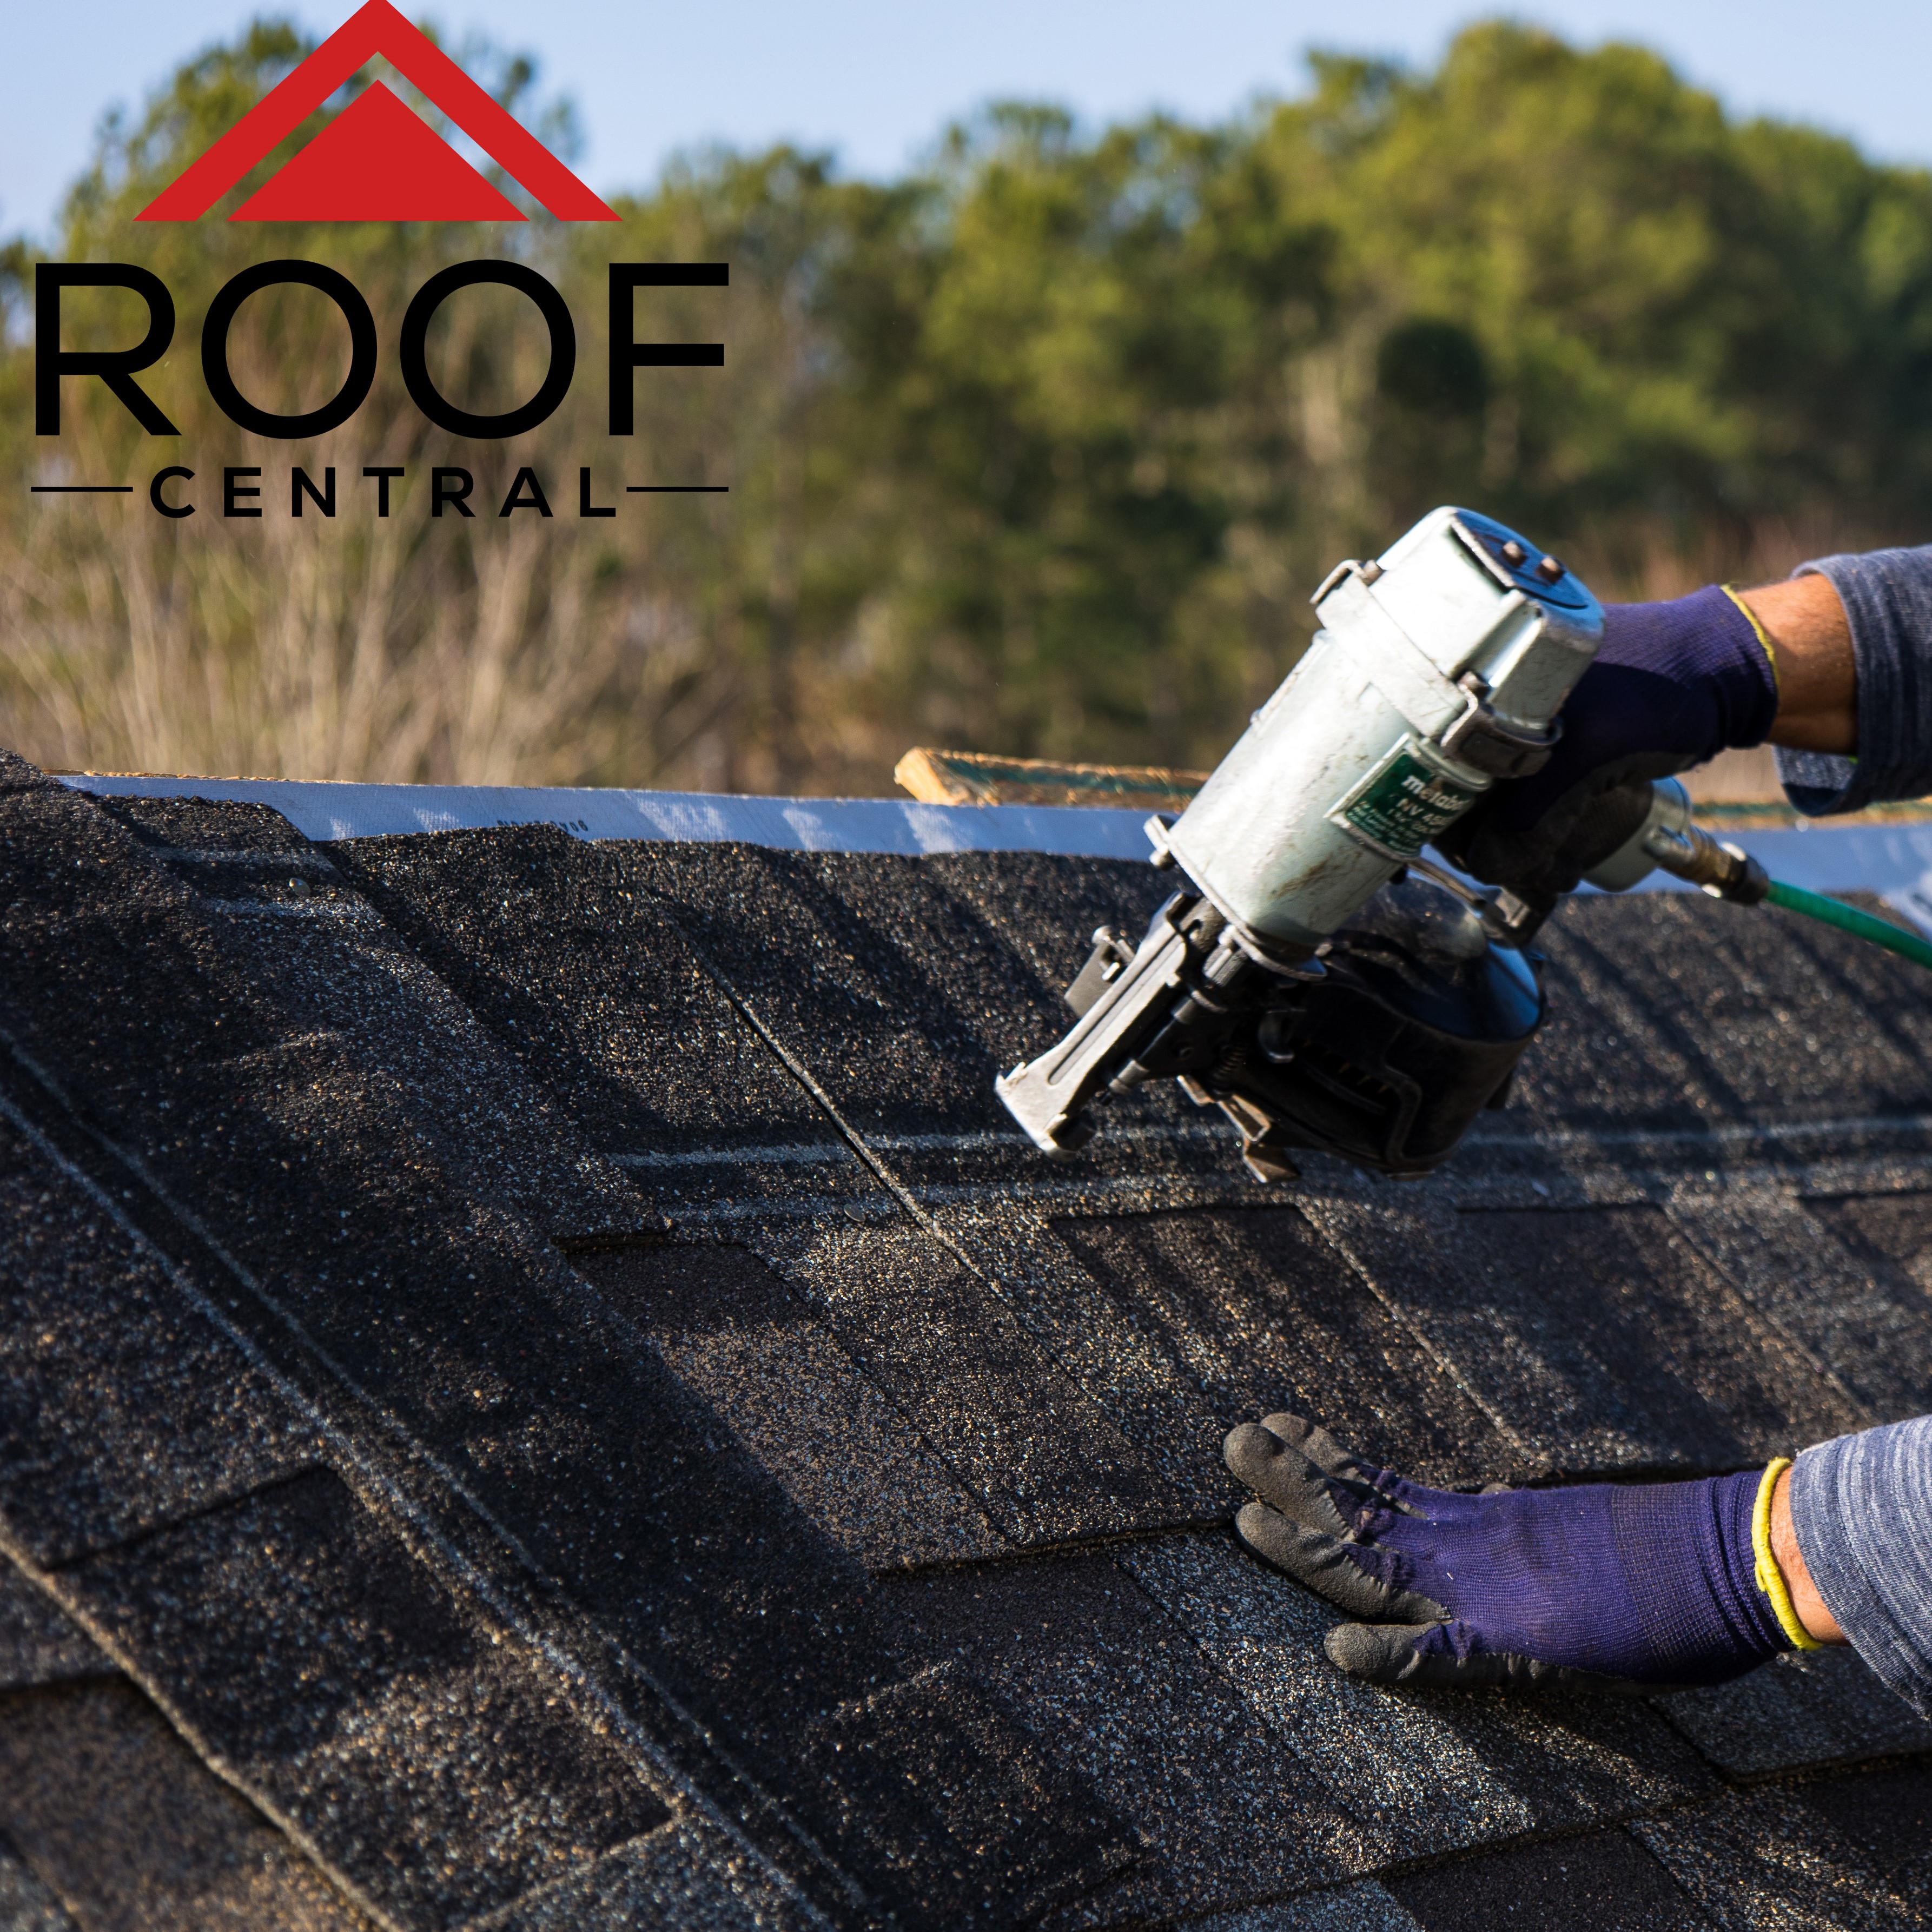 Asphalt shingles being installed on a roof with a nail gun.